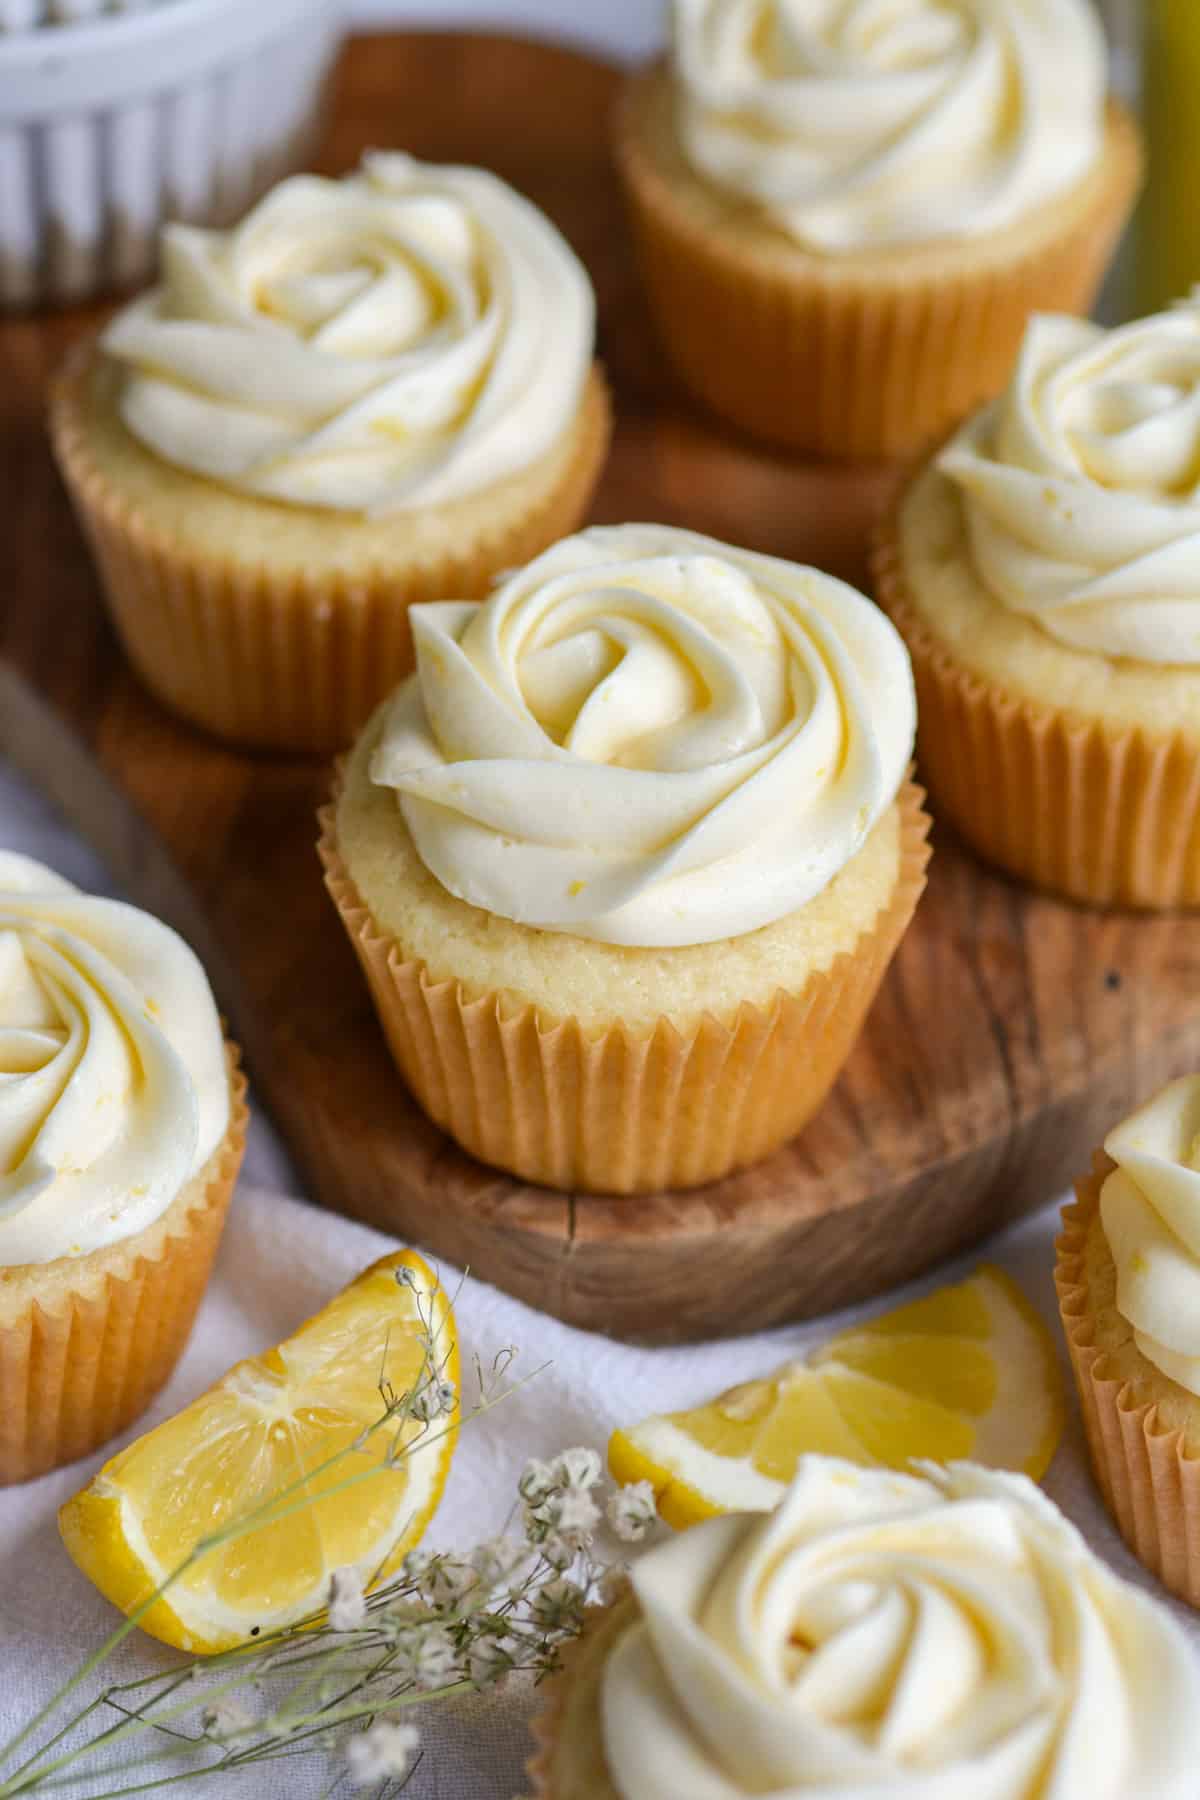 Vegan Lemon Curd Filled Cupcakes on a small wooden board with lemon slices in the foreground.